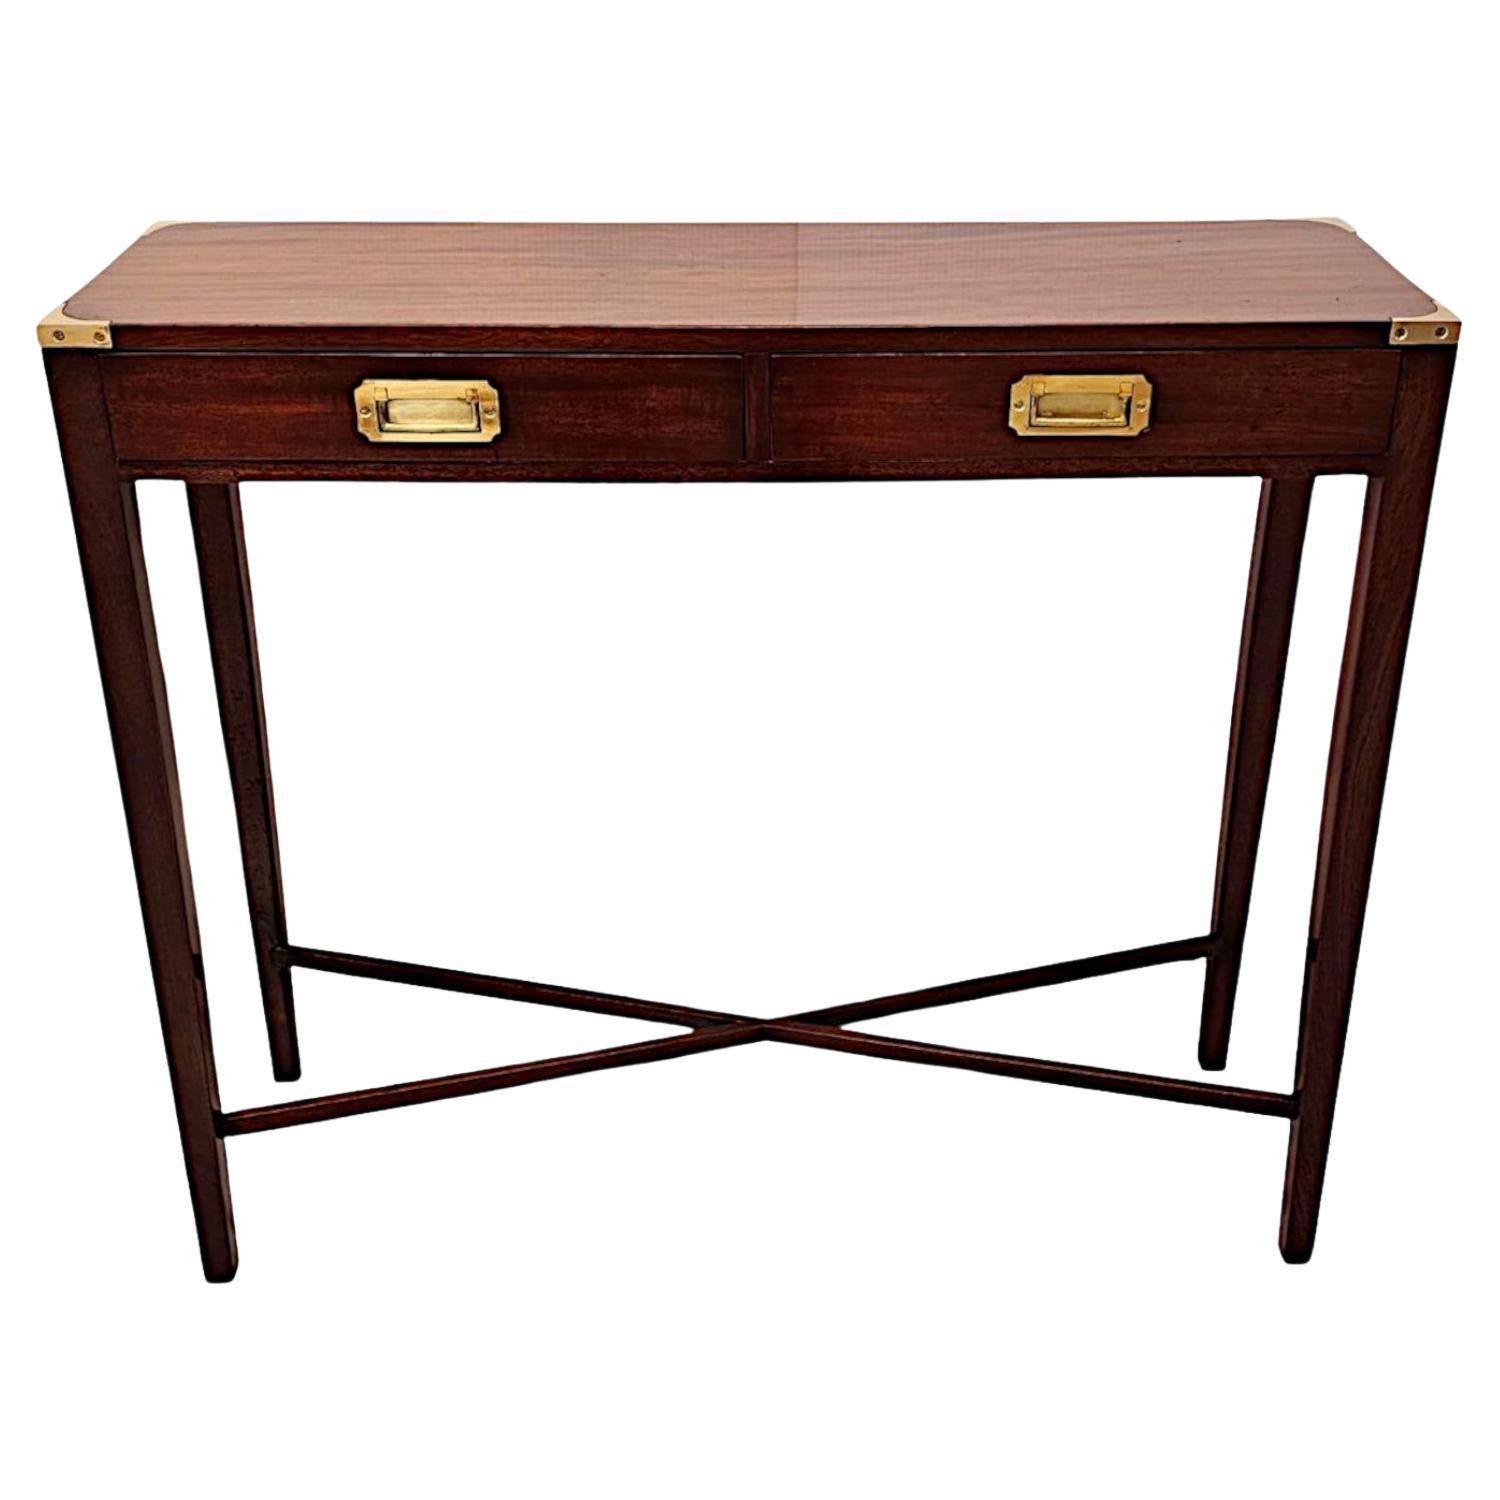 A Fine 20th Century Hand Made Mahogany Campaign Style Console Table For Sale